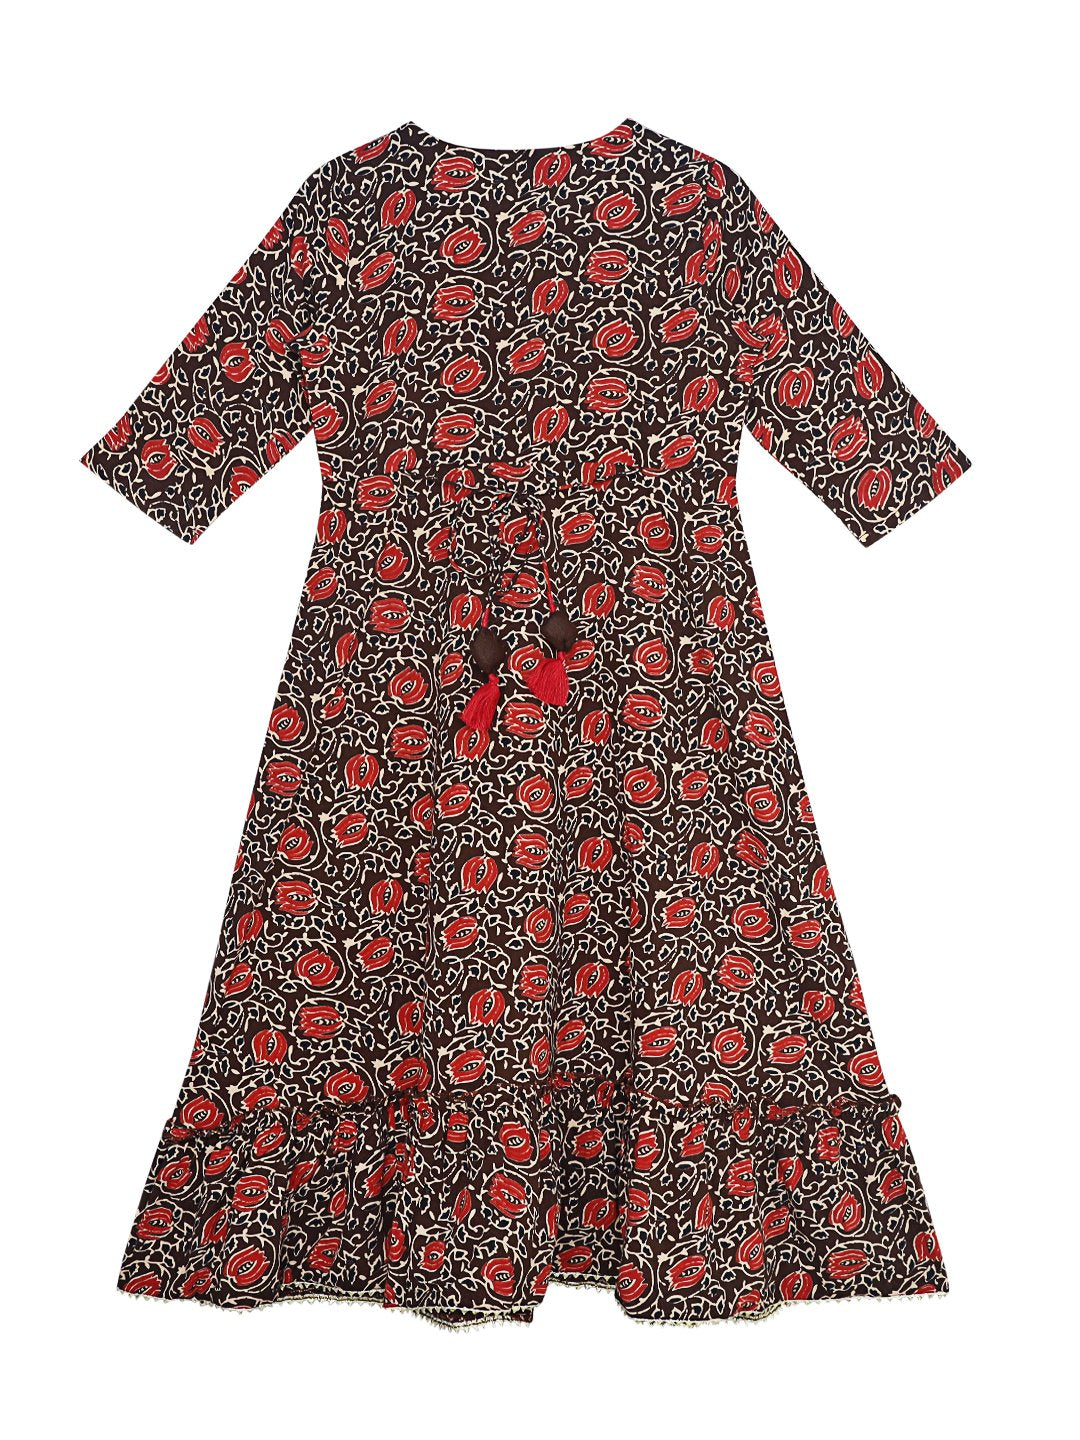 Ishin Girls Brown Floral Embroidered Tiered Dress